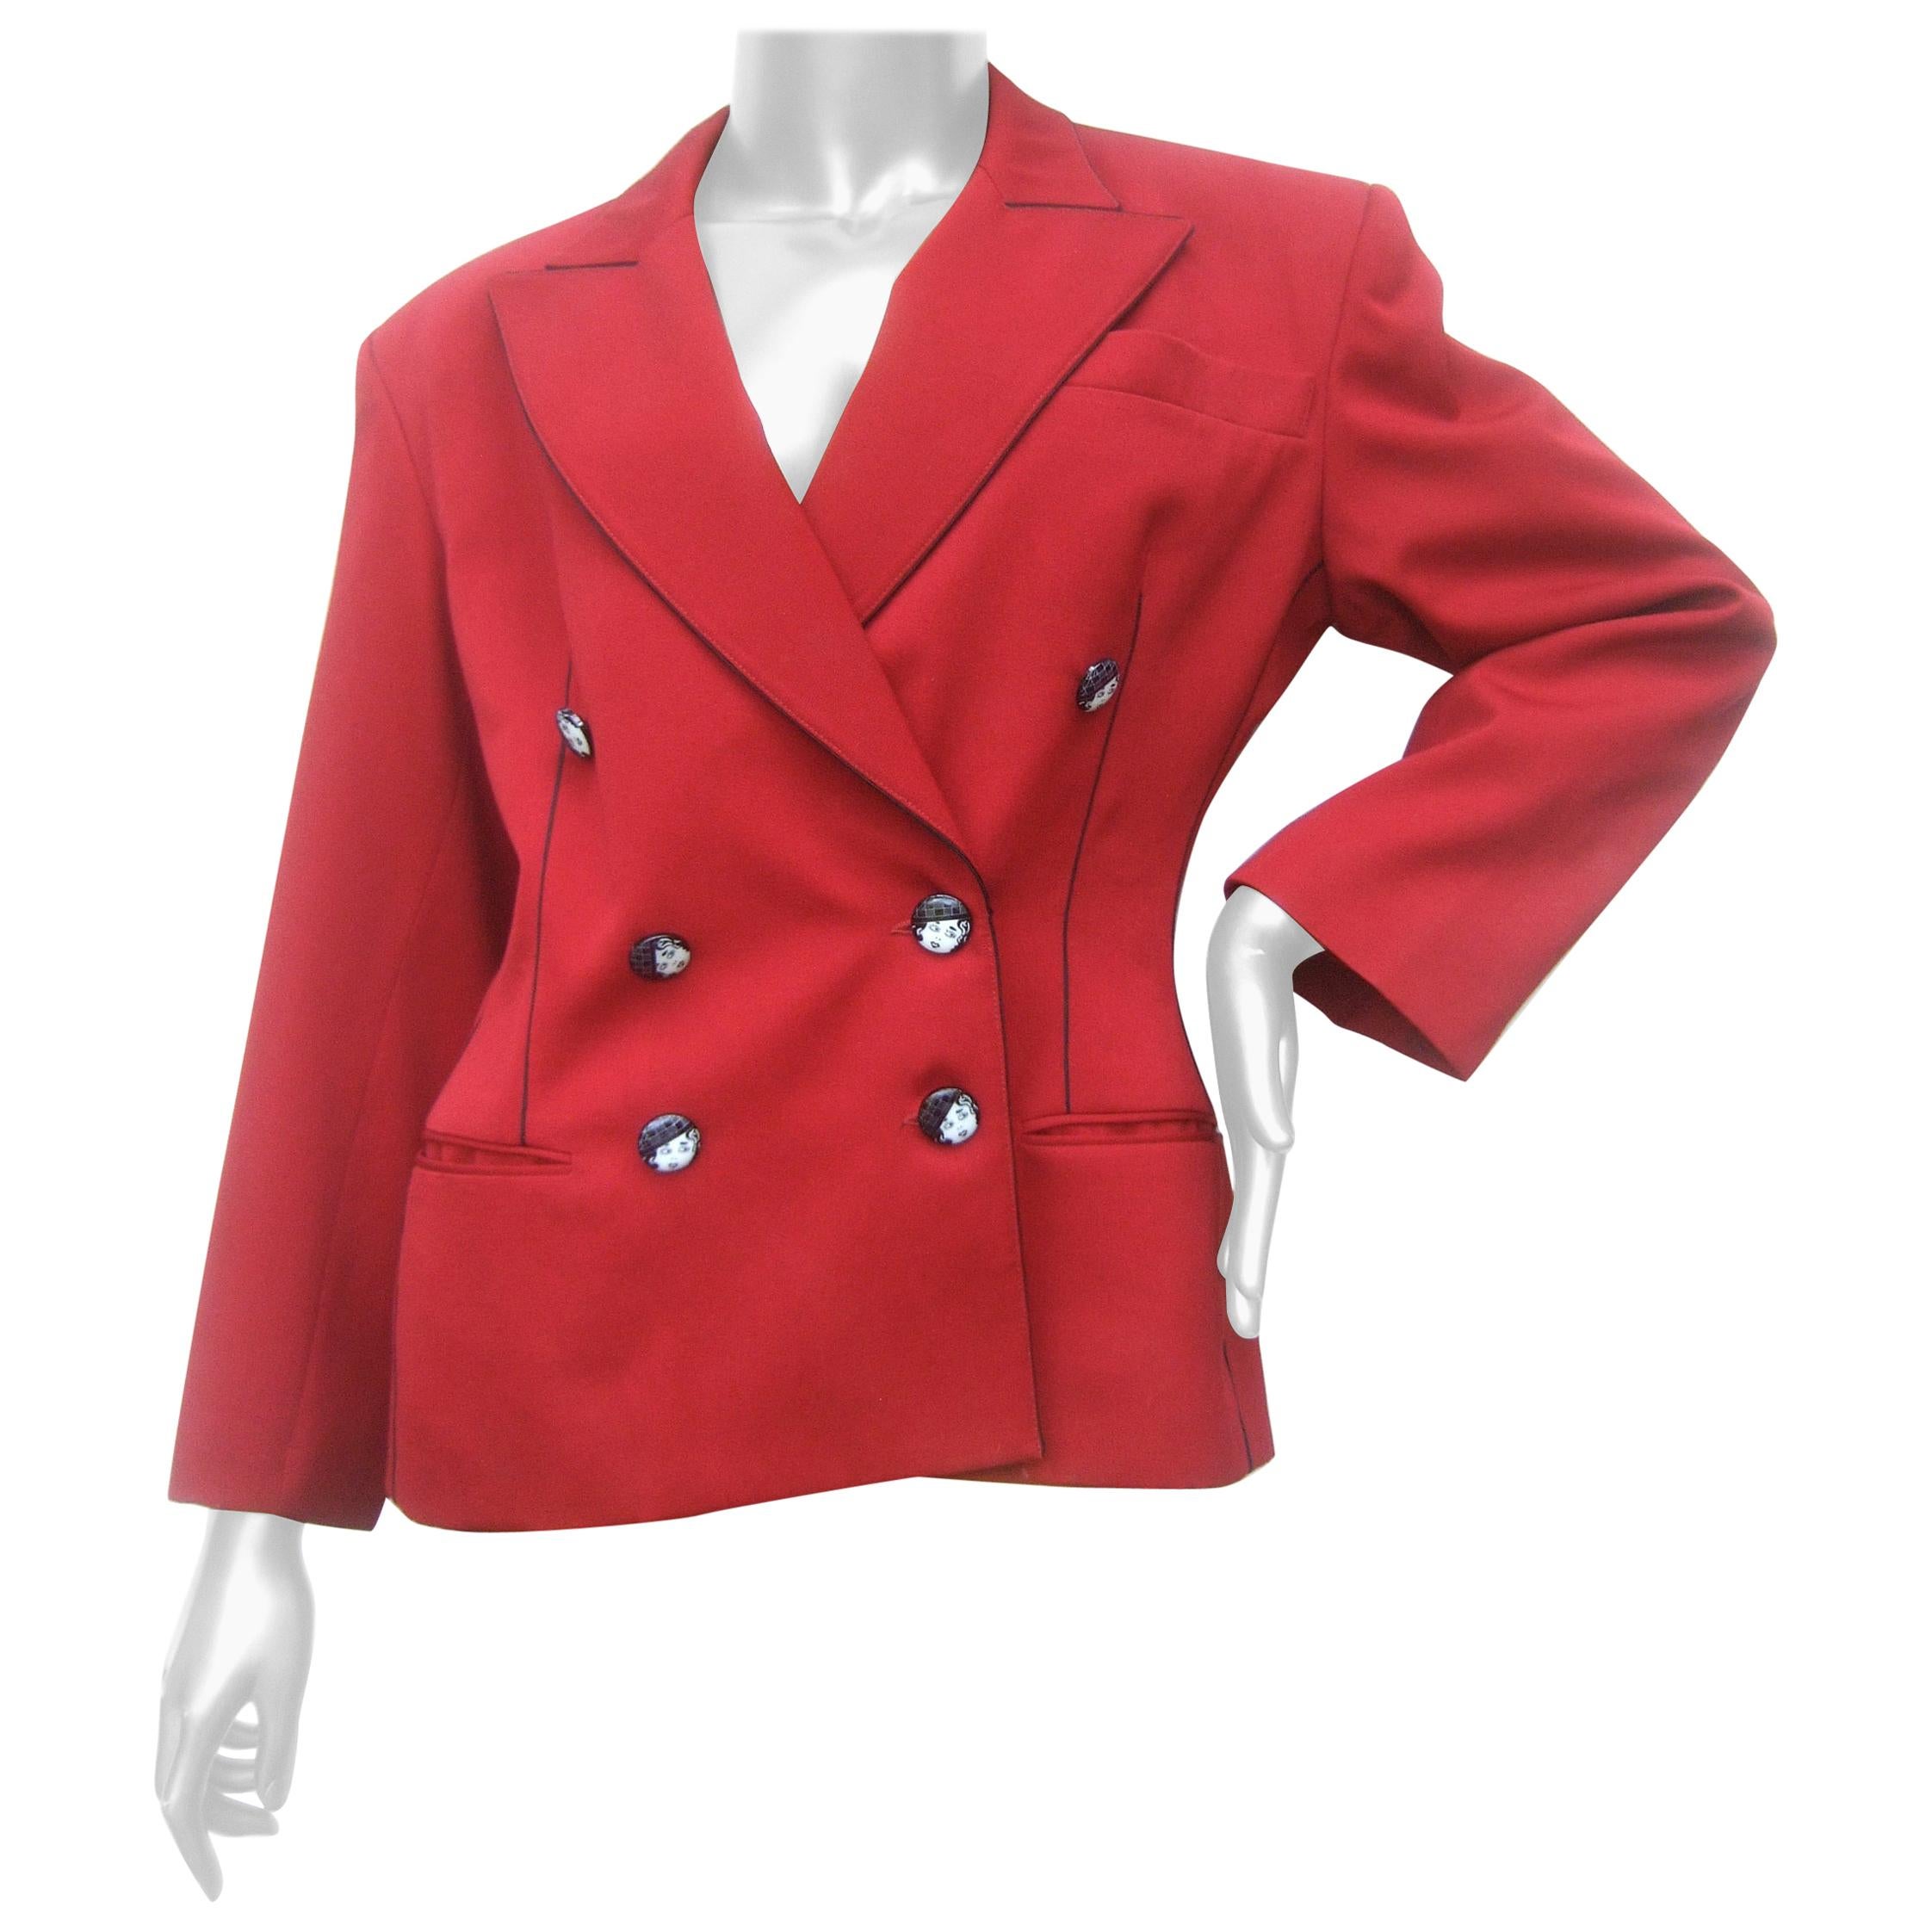 Lolita Lempicka Paris Red Wool Face Button Double-Breasted Blazer c 1980s For Sale